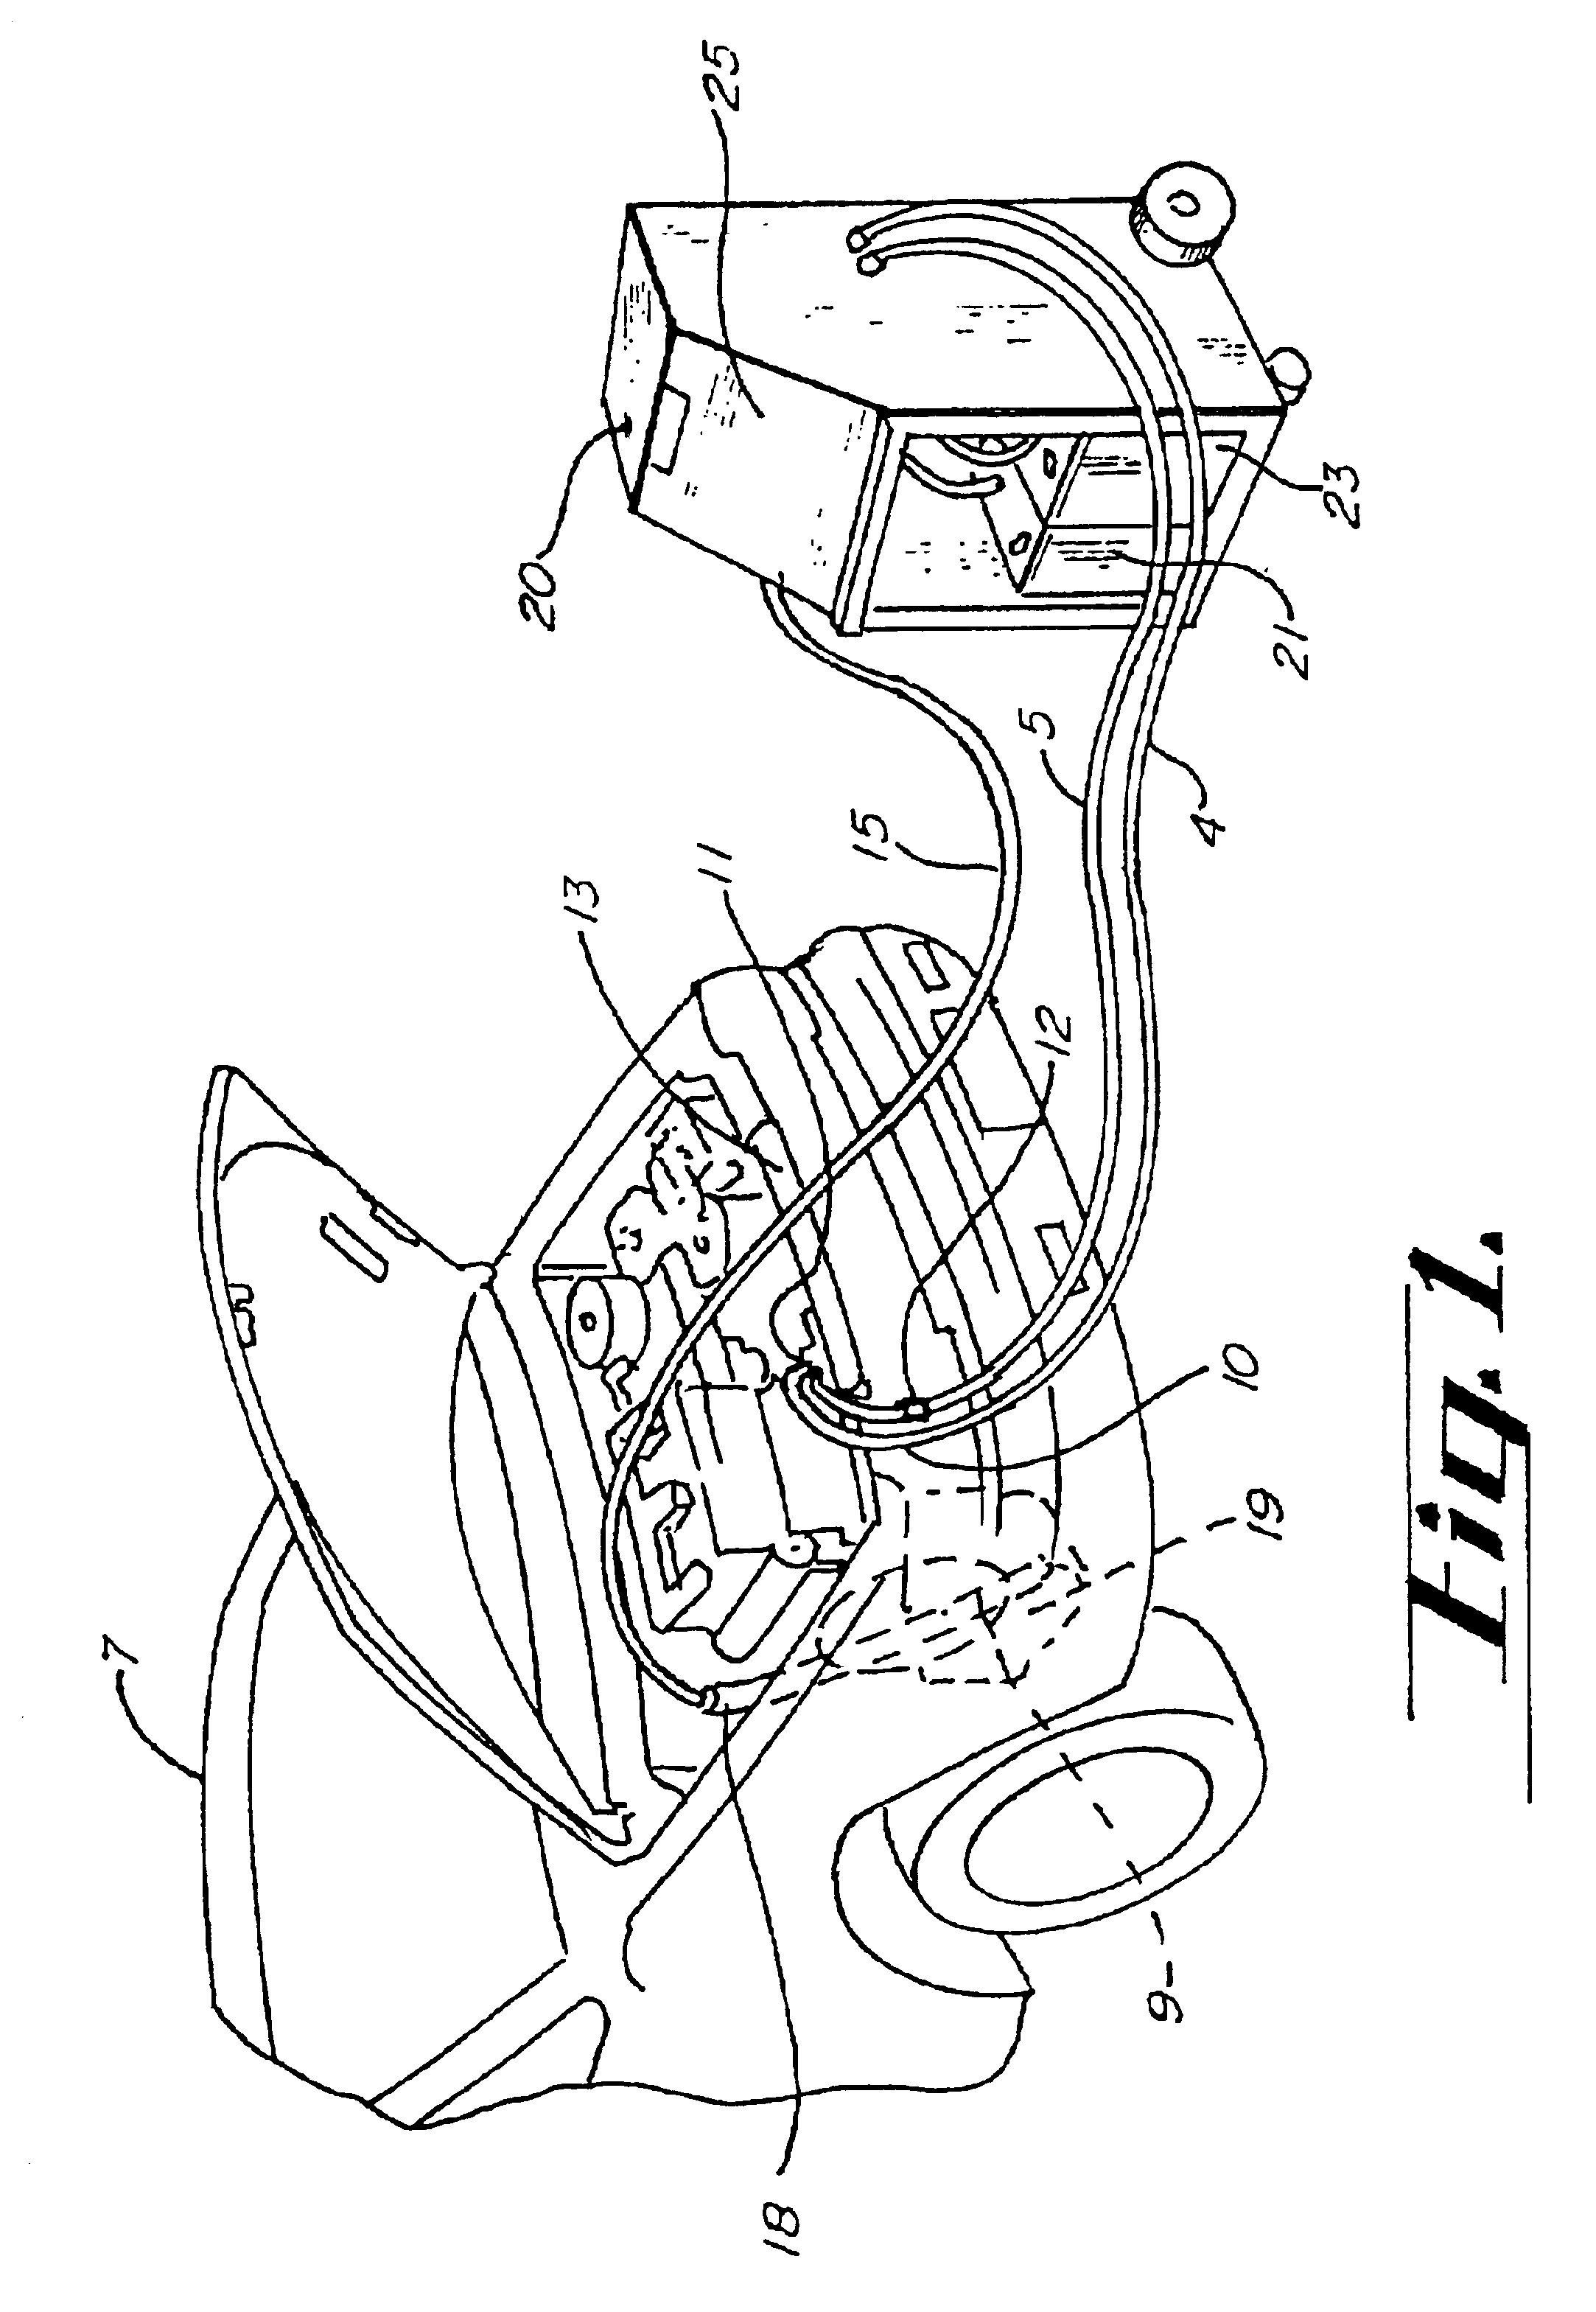 Complete fluid exchange system for automatic transmissions